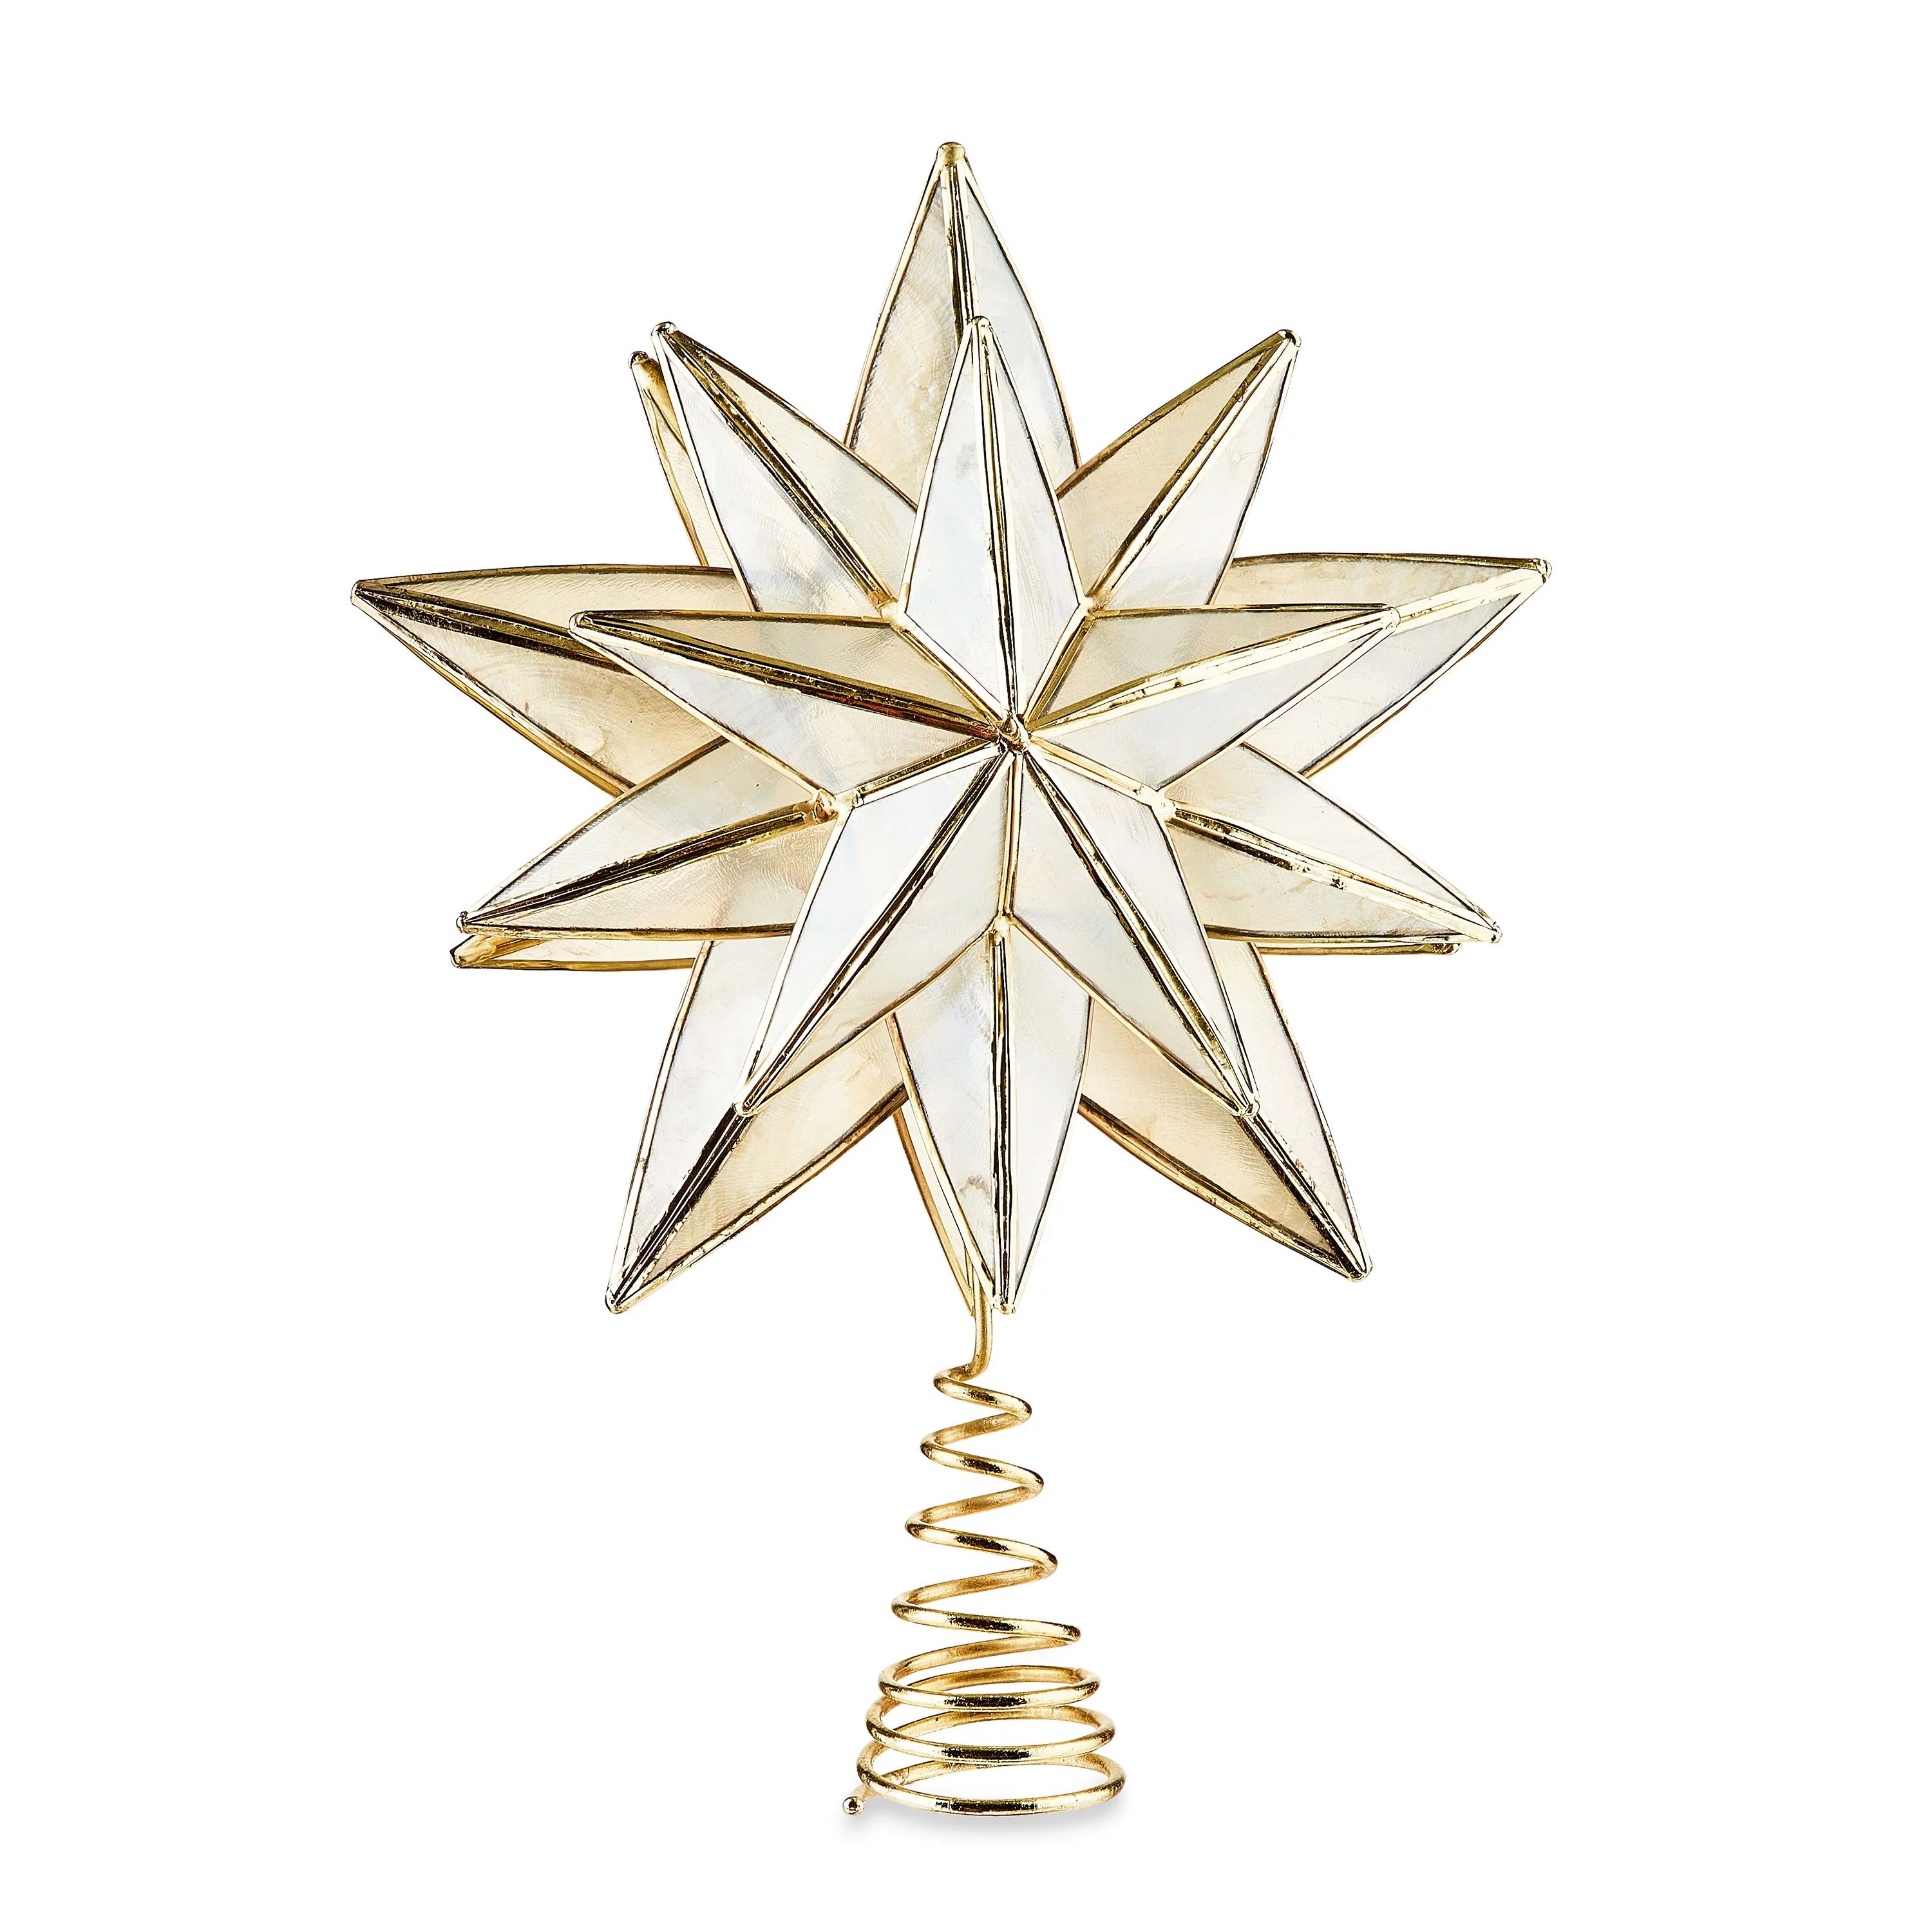 Gold Capiz Star Christmas Tree Topper, 10 in, 0.77 lb, by Holiday Time | Walmart (US)